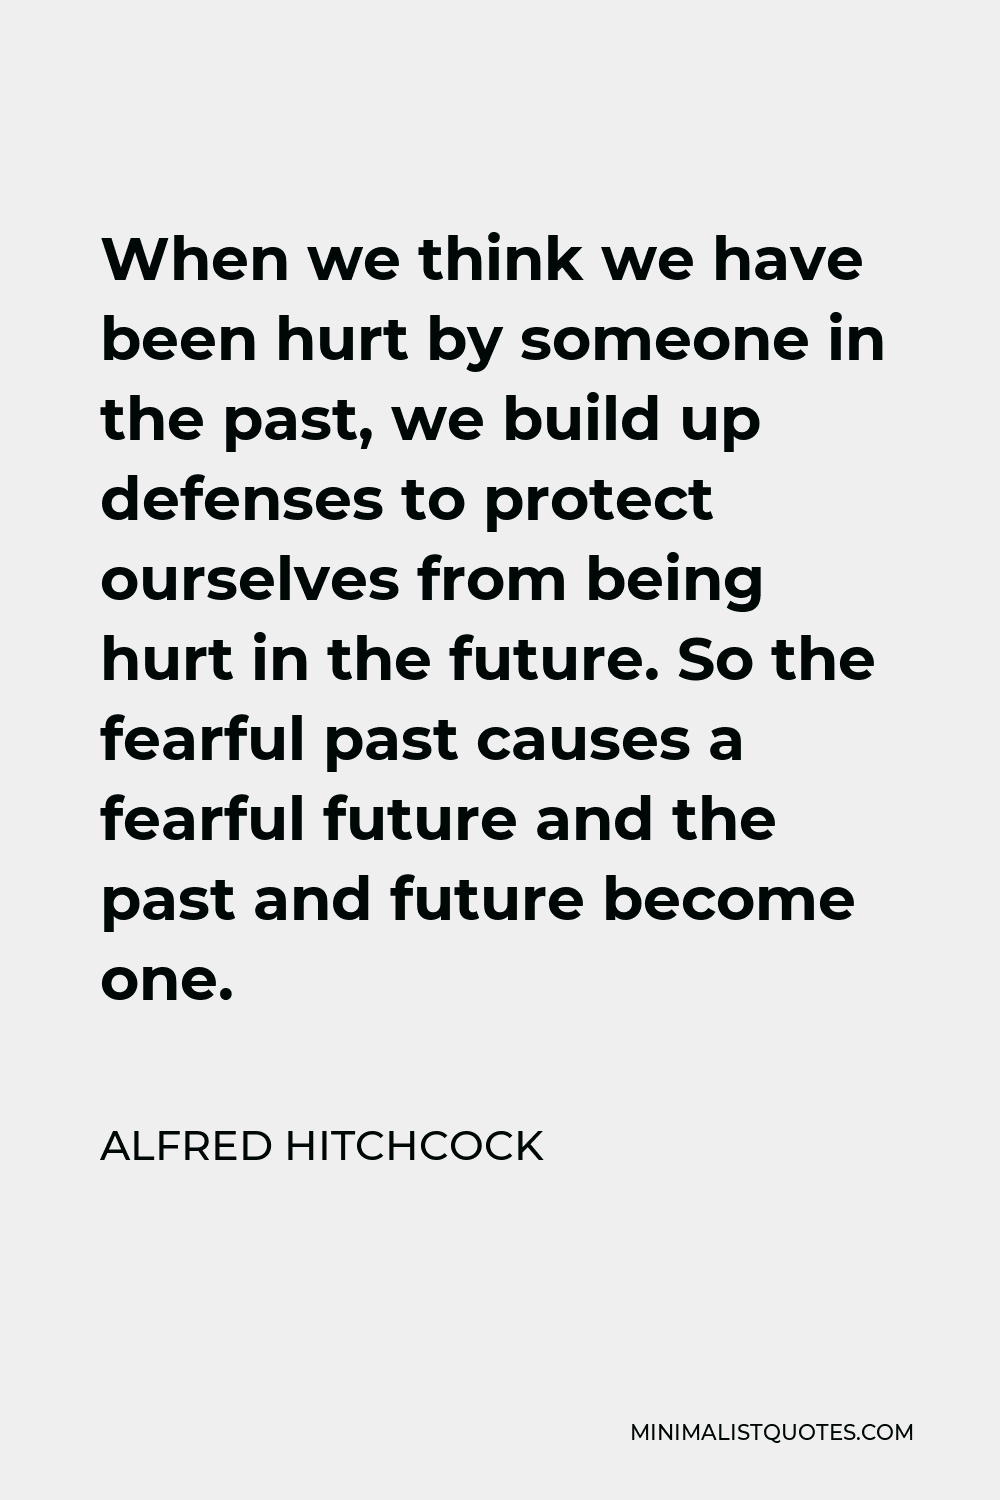 Alfred Hitchcock Quote - When we think we have been hurt by someone in the past, we build up defenses to protect ourselves from being hurt in the future. So the fearful past causes a fearful future and the past and future become one.